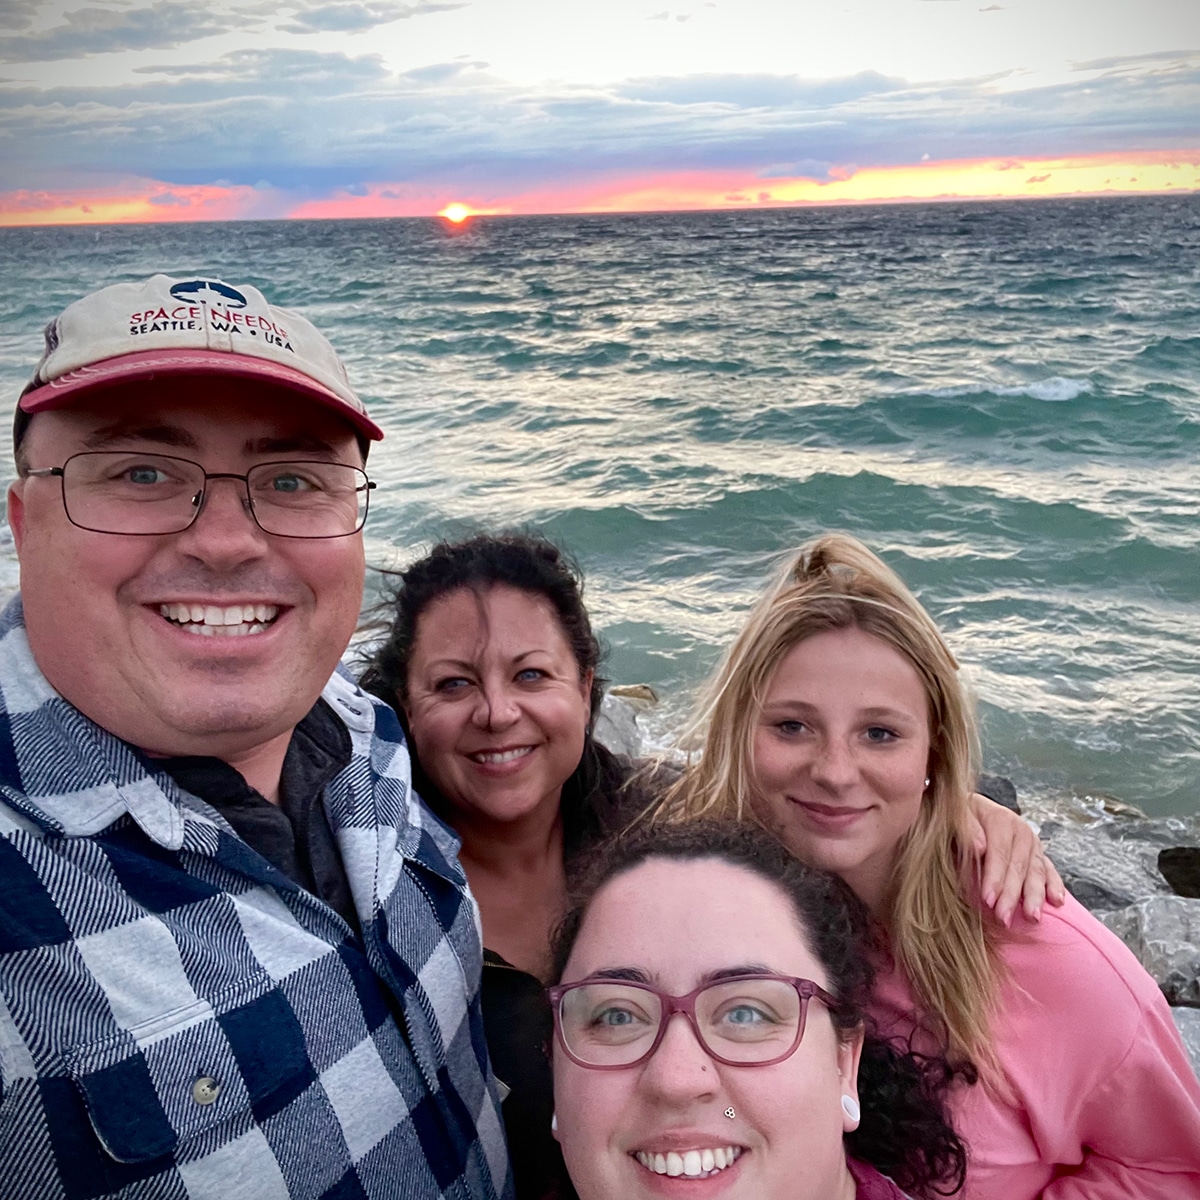 Steve and I with our daughter and niece standing on a Lake Michigan beach in Petoskey with a brilliant sunset over the water behind us.